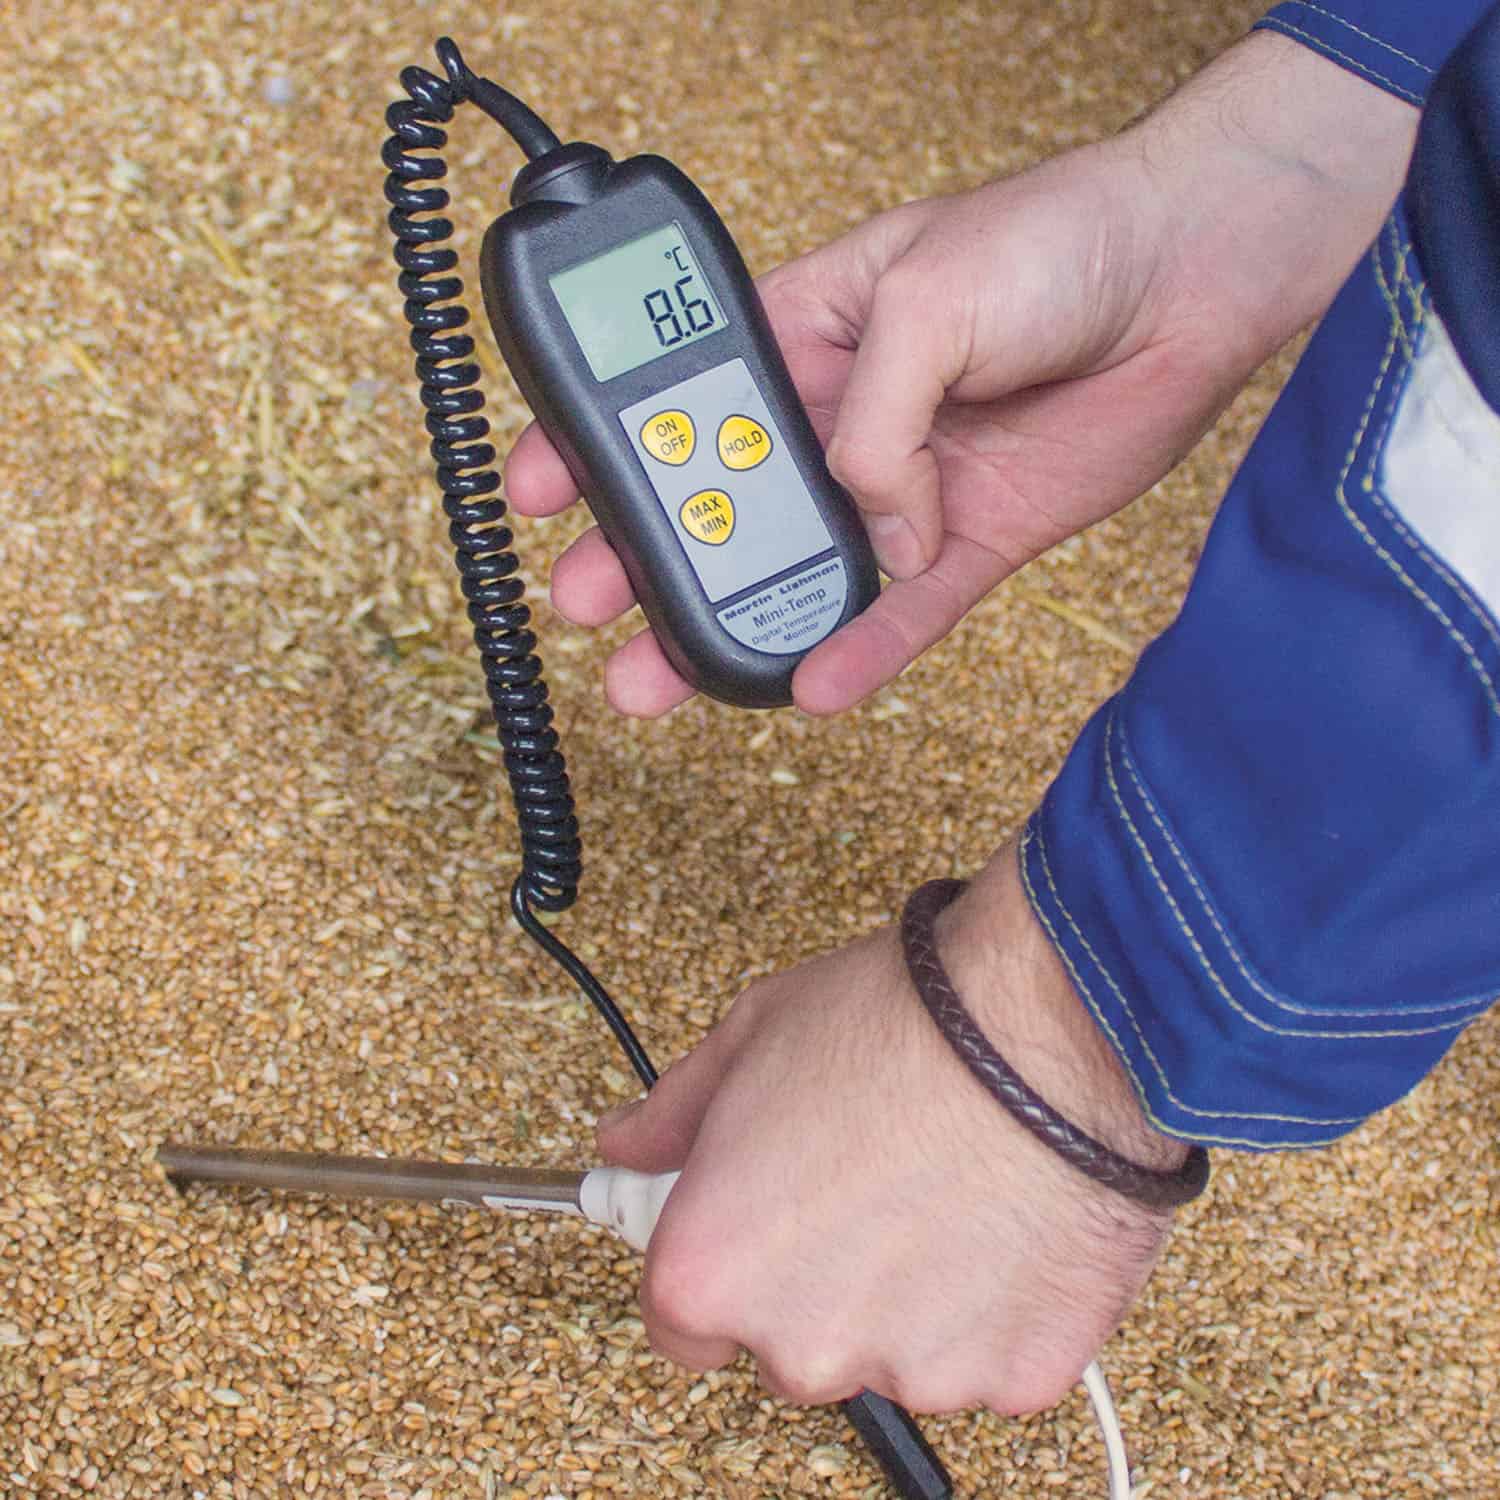 The MiniTemp Monitor is a easy to use hand held device for quickly measuring grain temperatures.